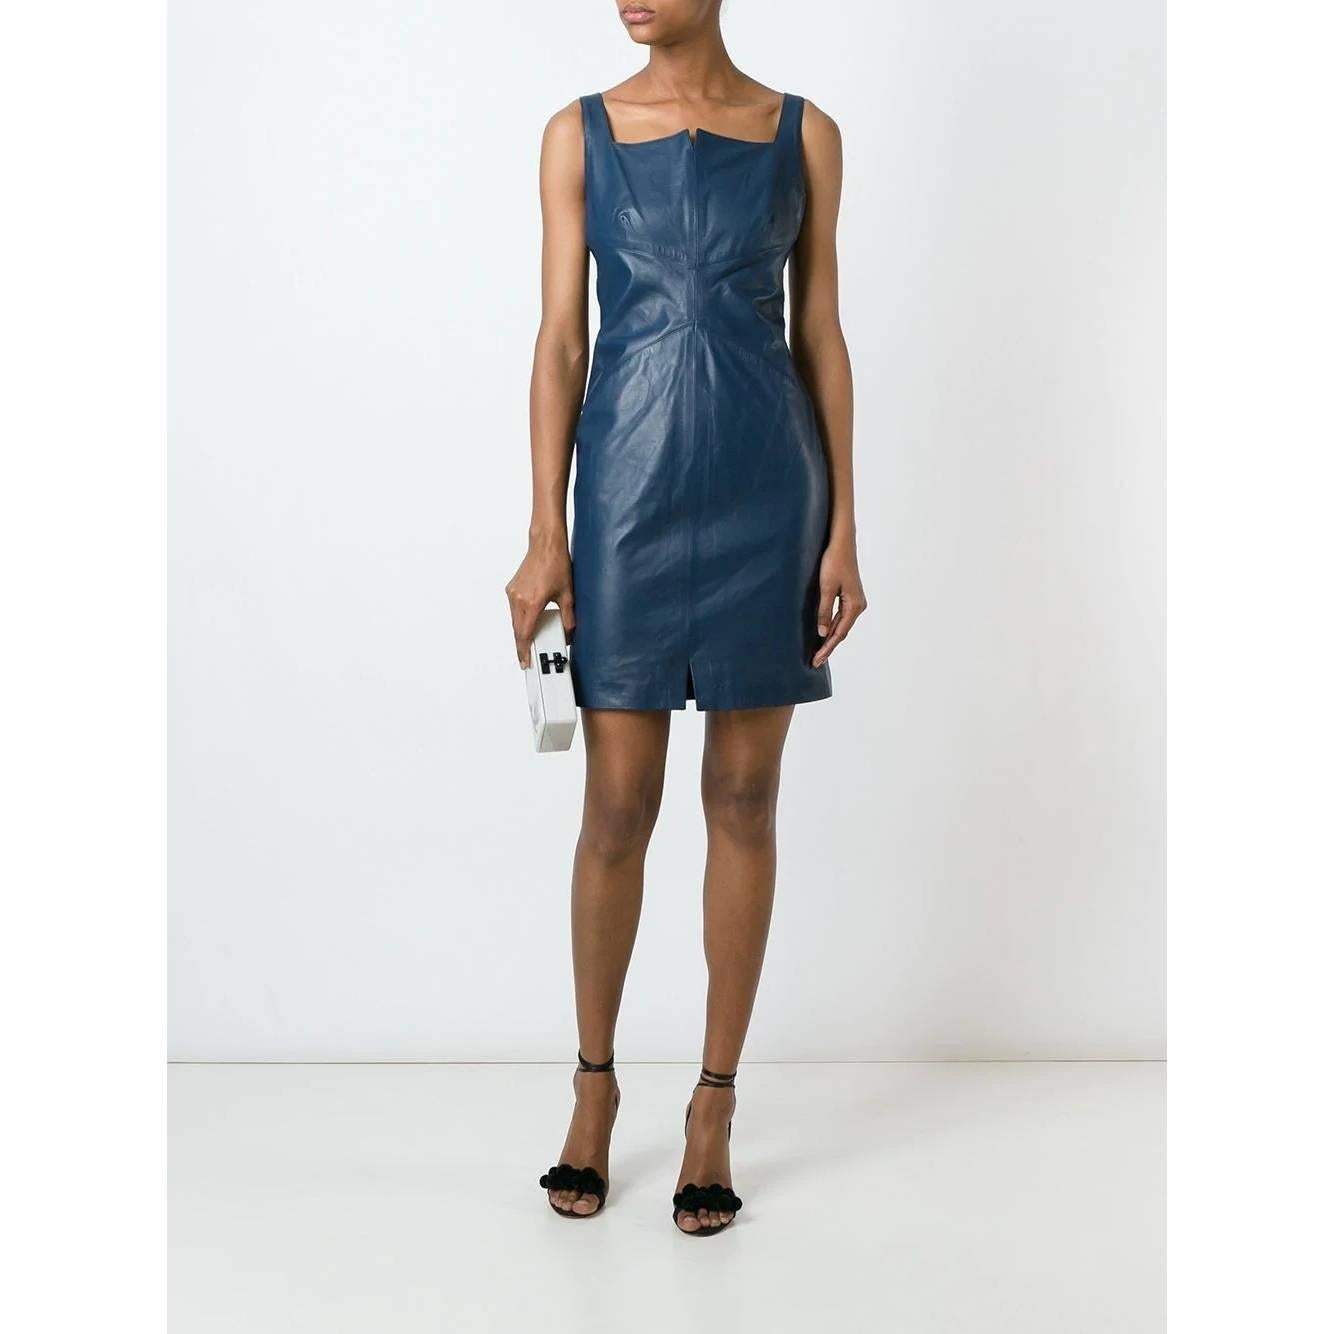 Romeo Gigli blue leather above the knee dress. Sleeveless model with shoulder straps, square neckline and side zip fastening.

Size: 44 IT

Flat measurements
Height: 90 cm
Bust: 38 cm
Waist: 35 cm

Product code: A5767

Notes: The product shows some